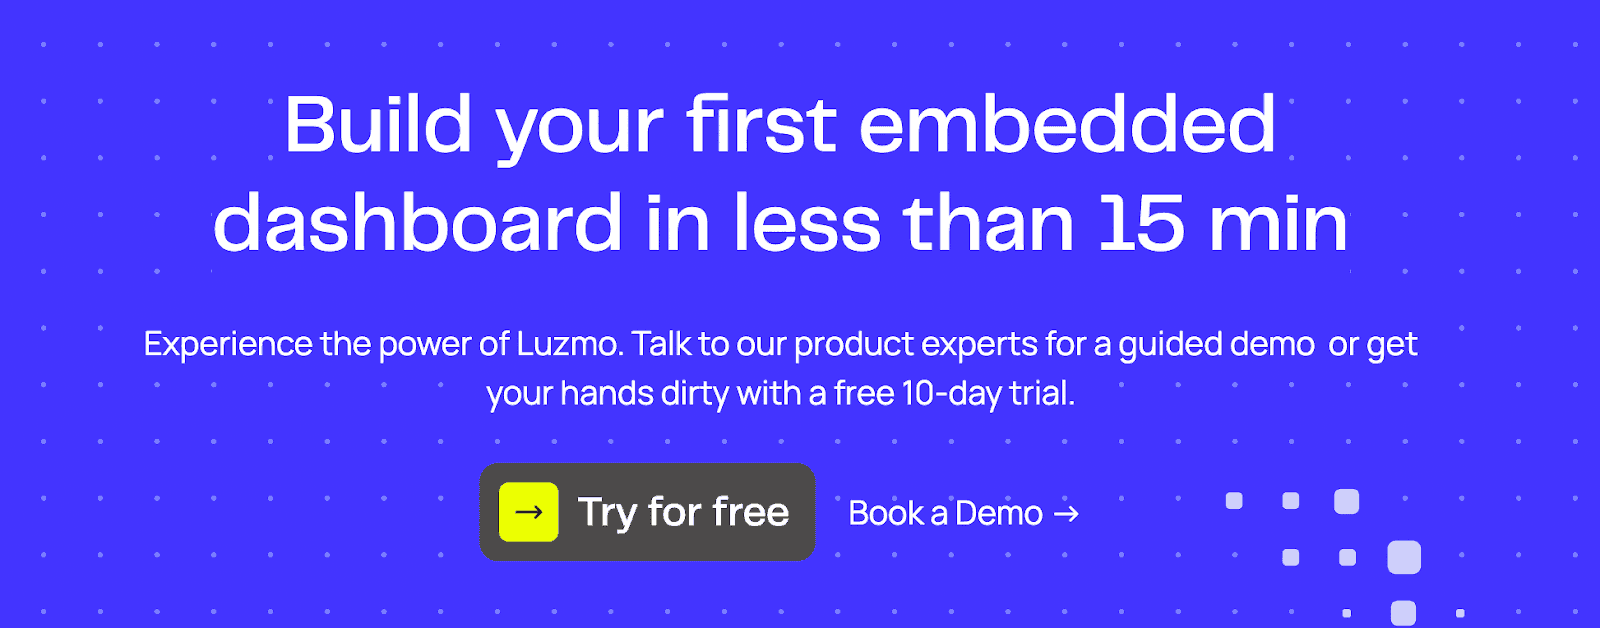 Luzmo - demonstrate the time savings